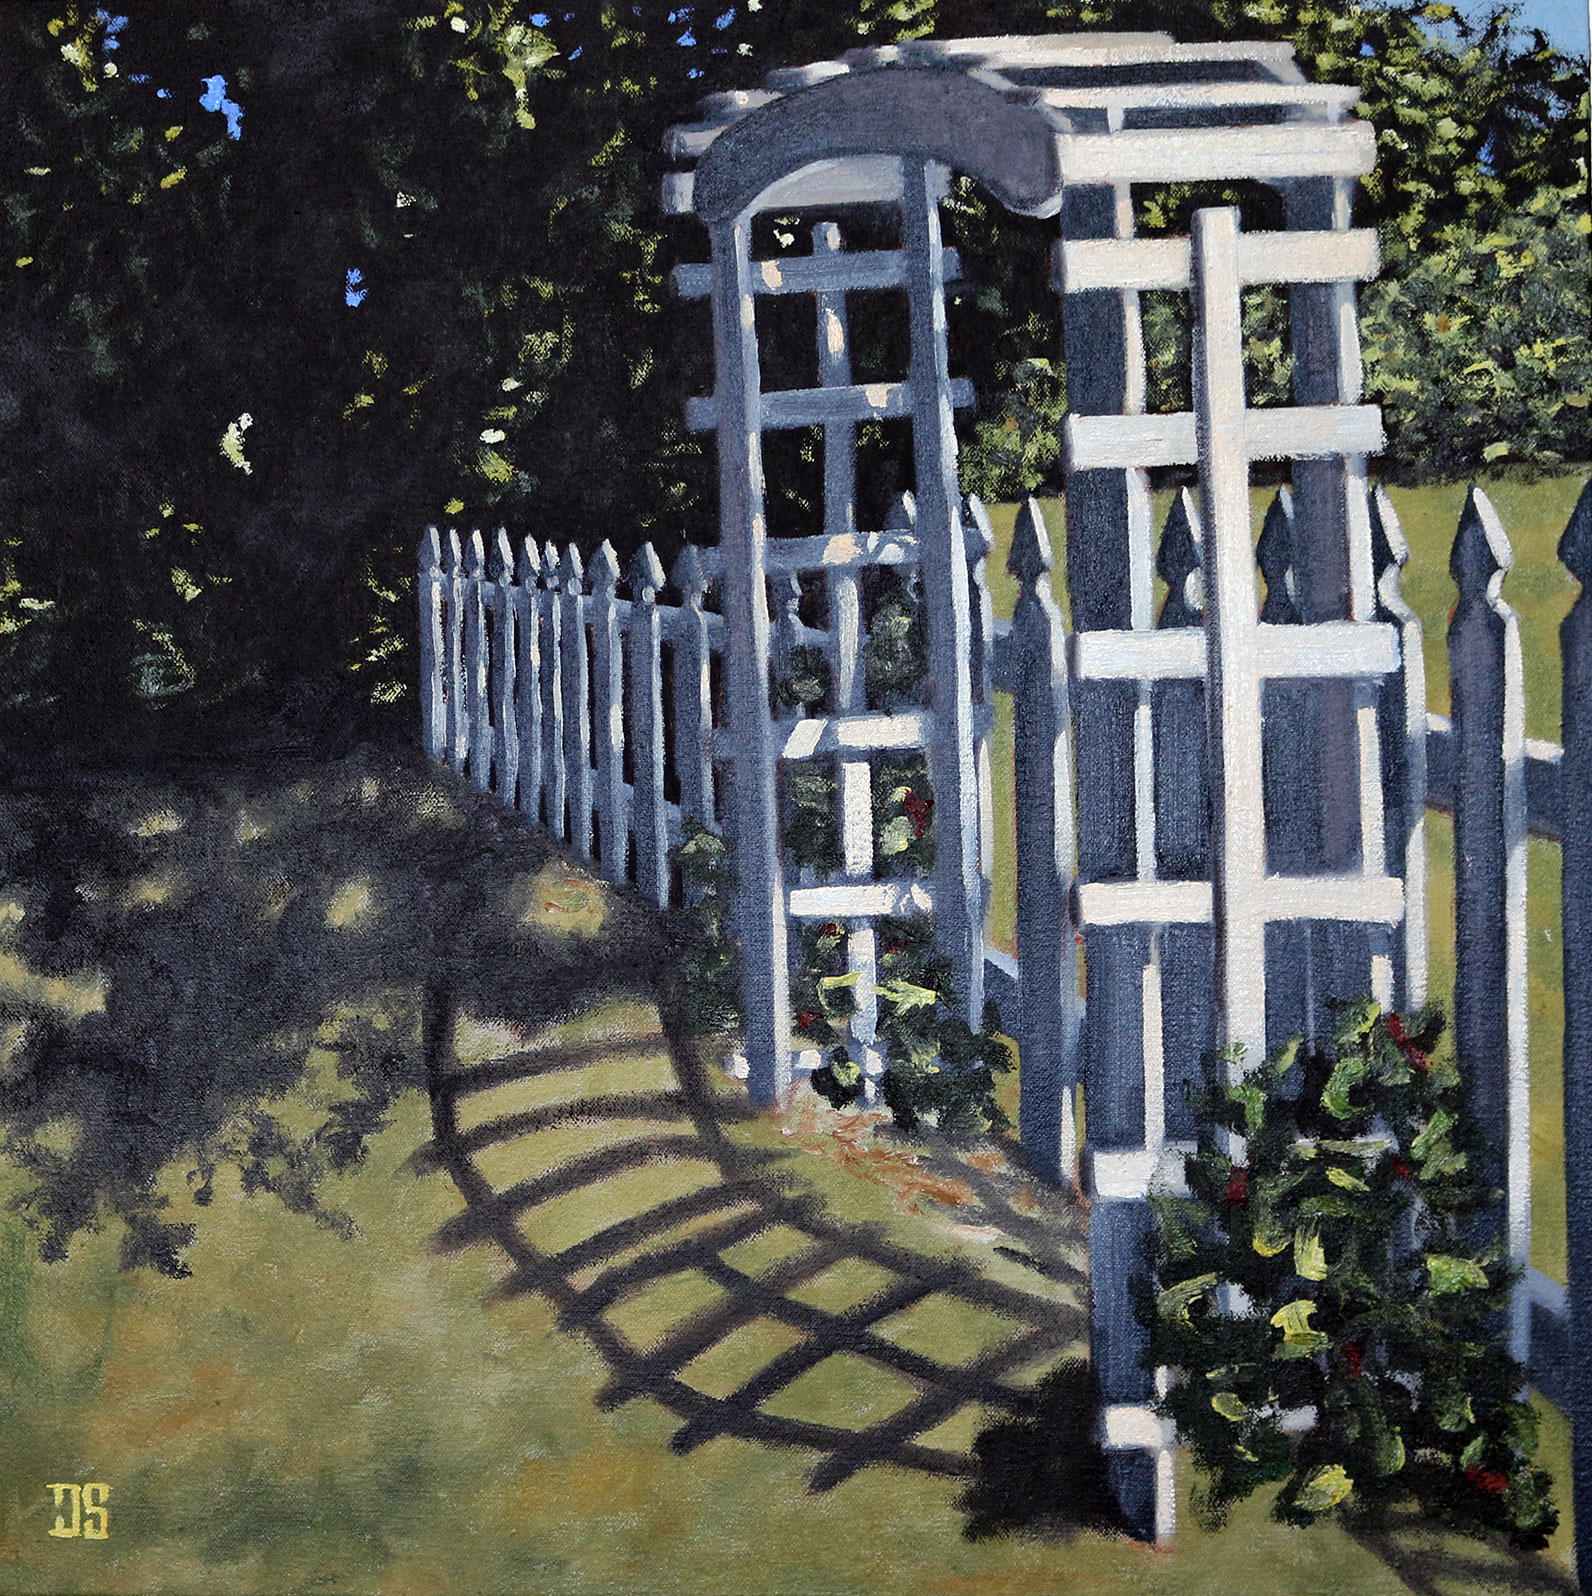 Oil painting "The Side Gate Greets the Sunrise" by Jeffrey Dale Starr